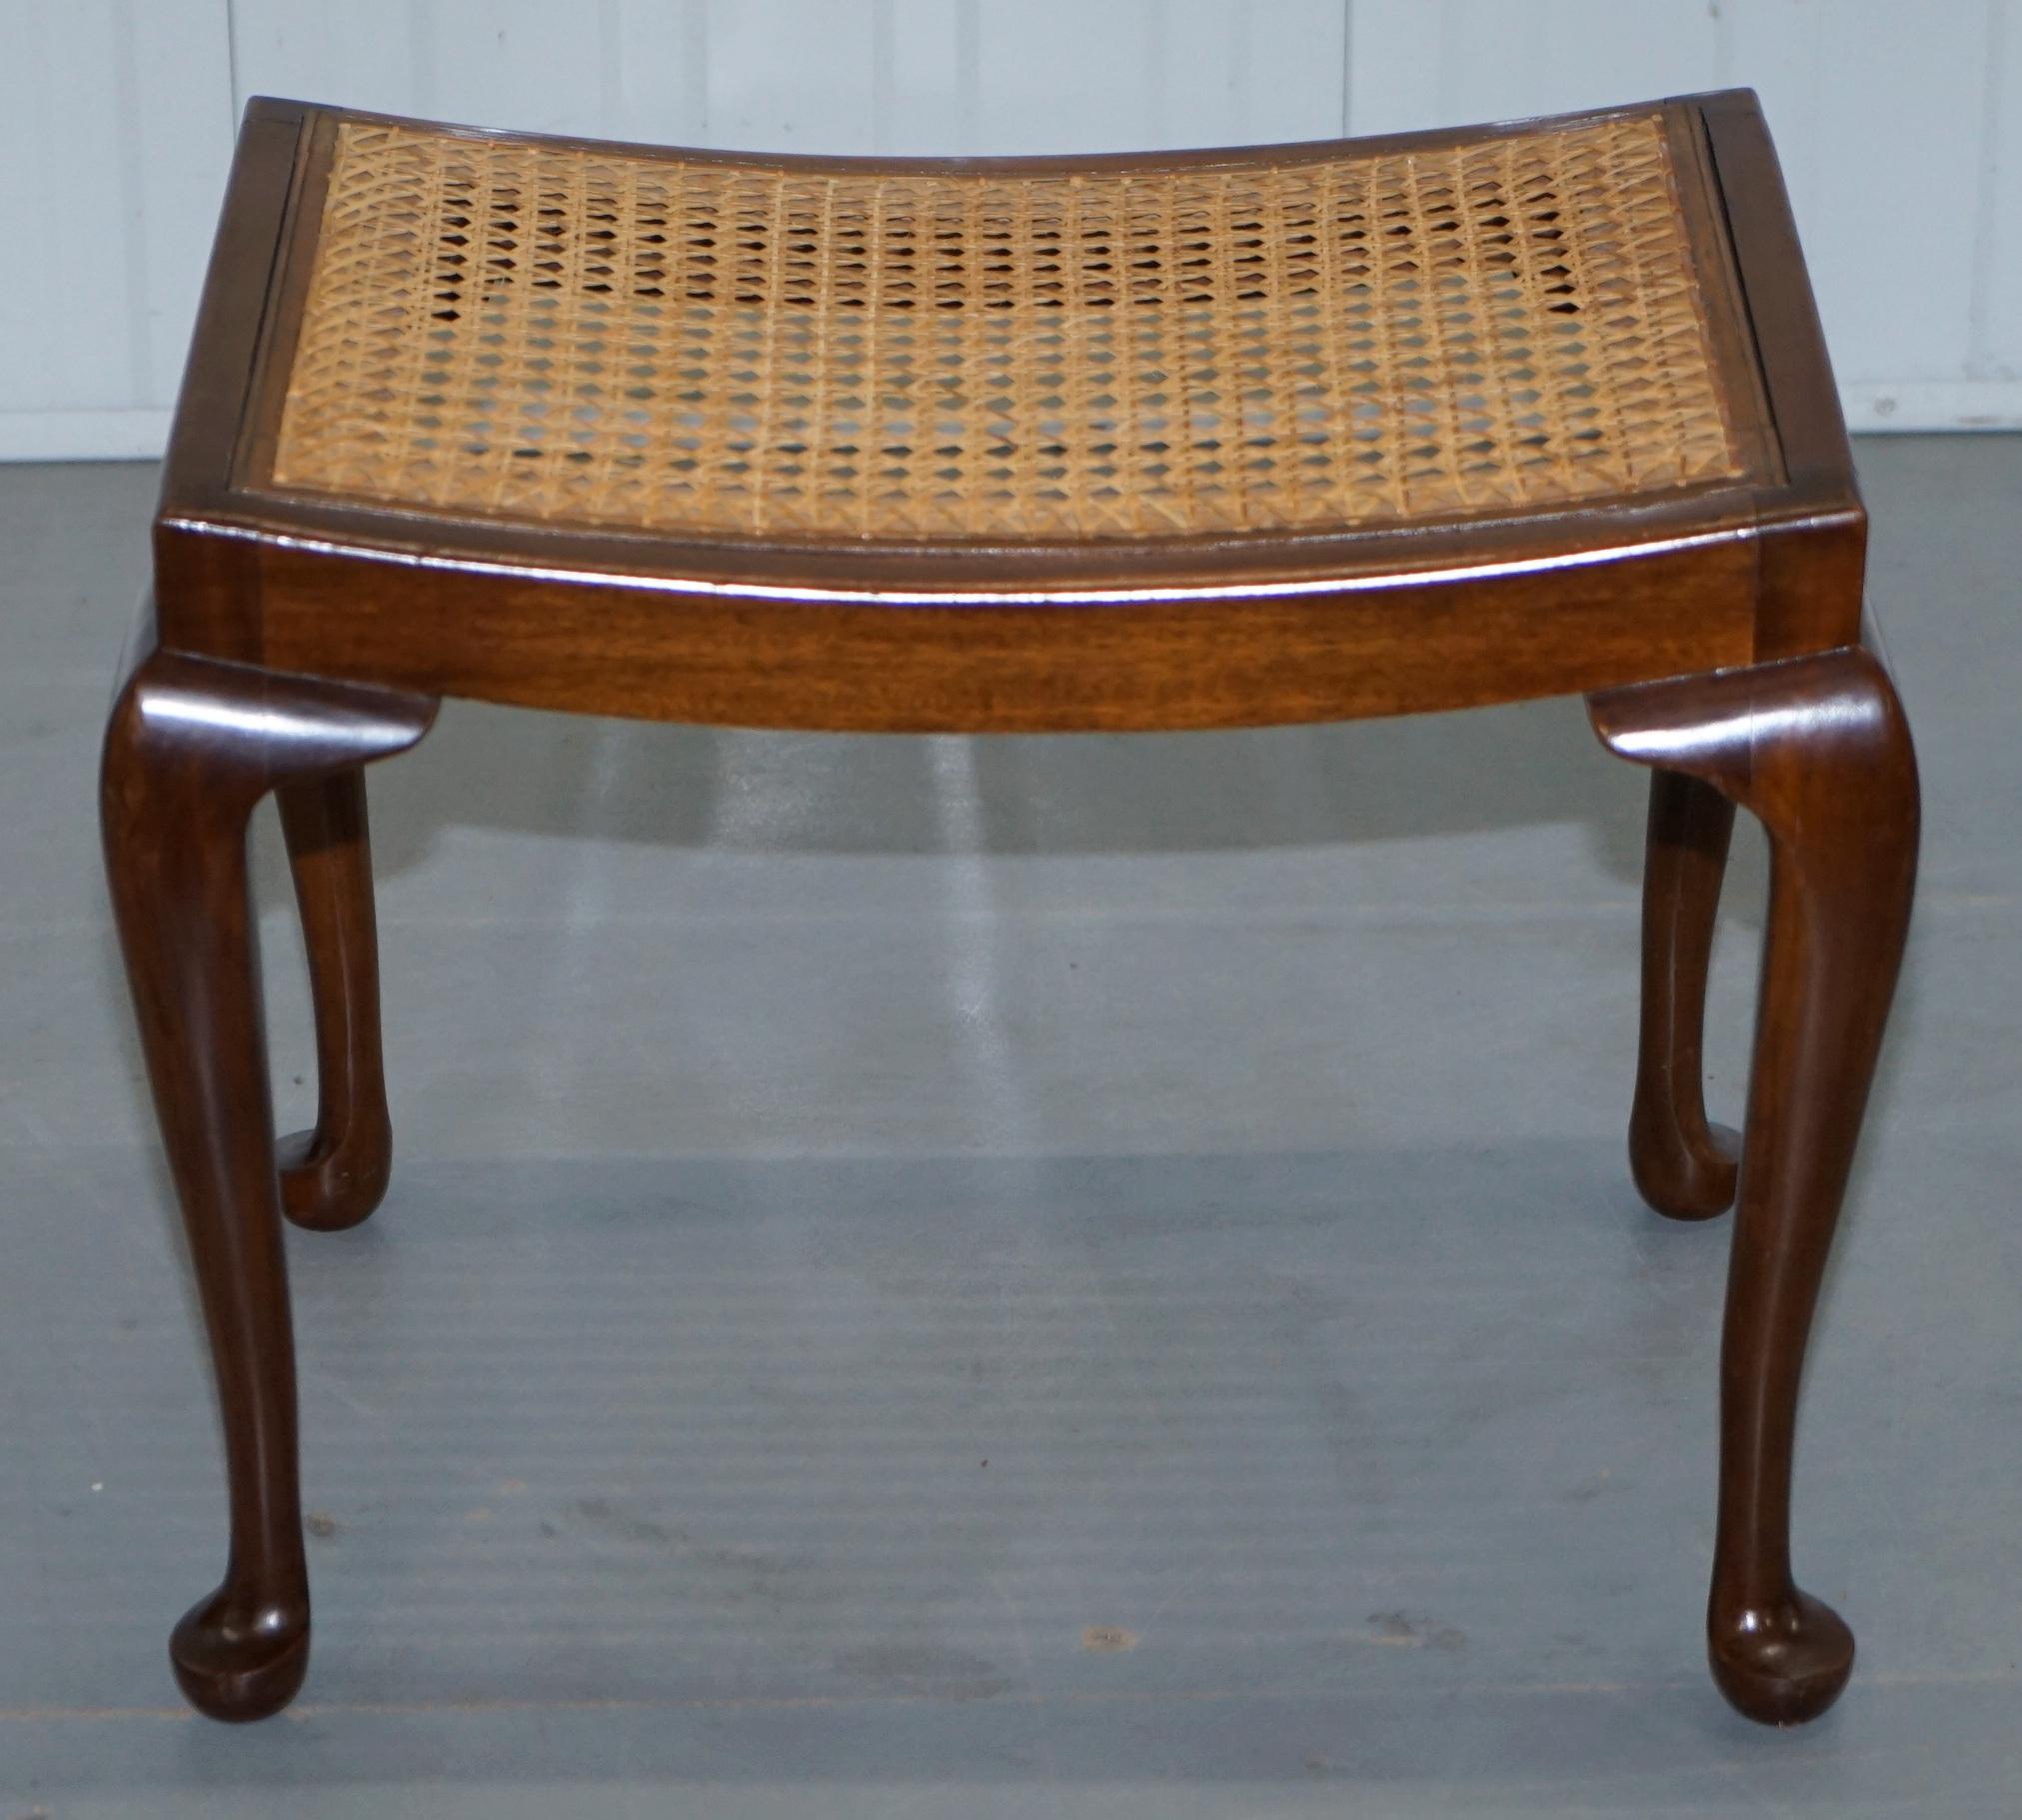 We are delighted to offer for sale this lovely handmade in England vintage circa 1940’s bergere rattan stool with elegant cabriolet legs

A good looking and functional piece of furniture, ideally suited as a dressing table or desk stool, it can of